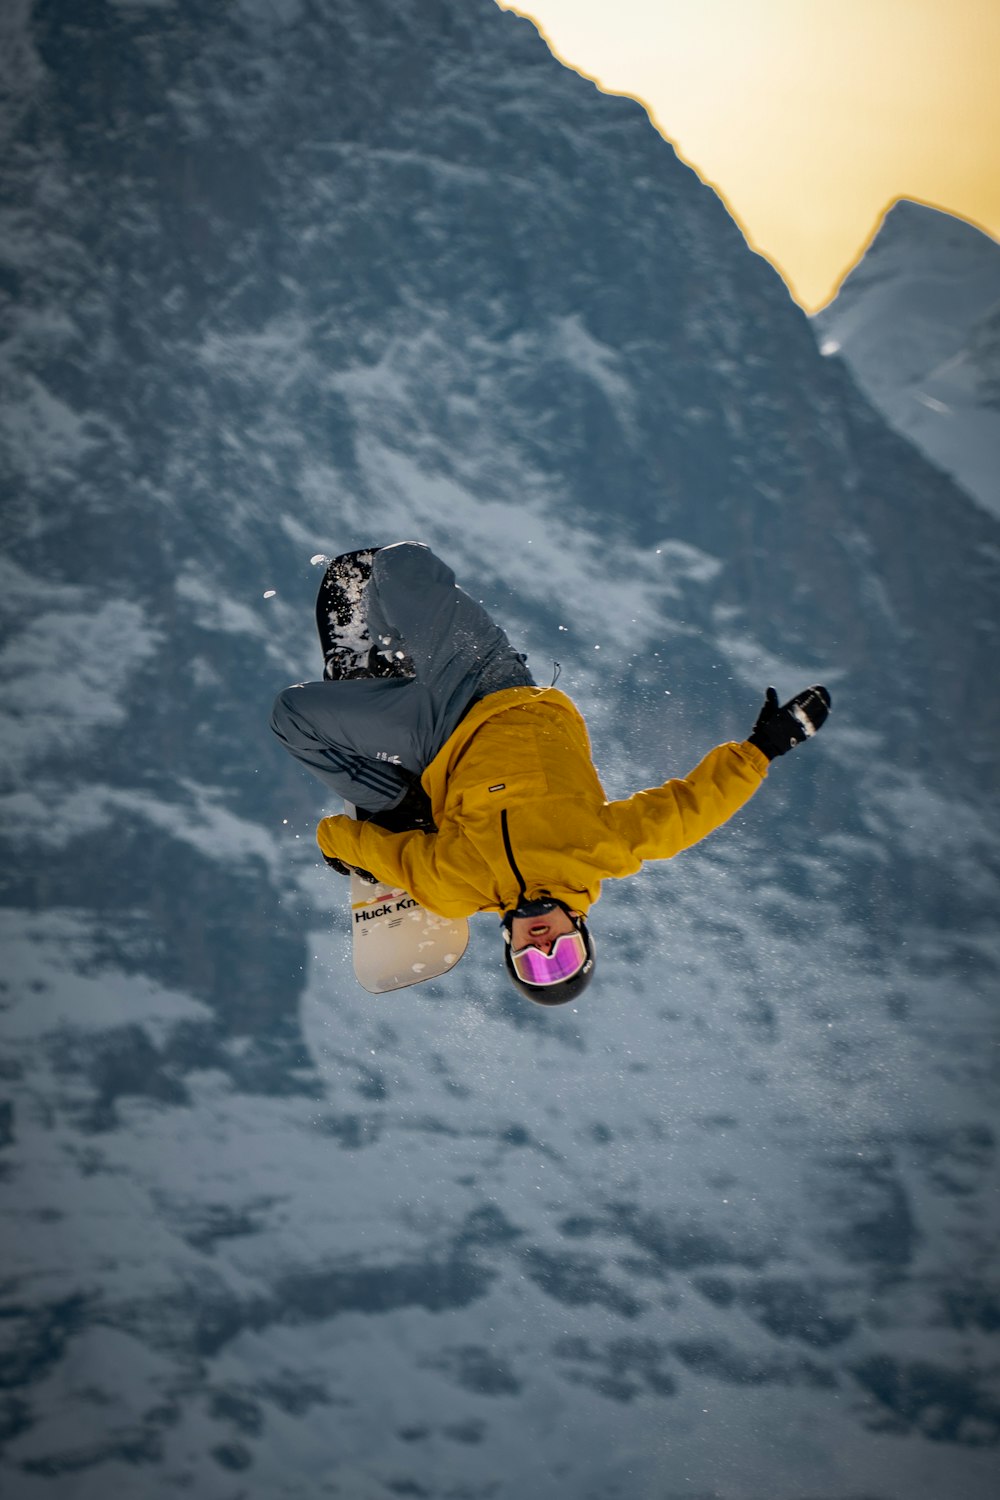 man in blue jacket and yellow pants wearing black helmet jumping on snow covered mountain during